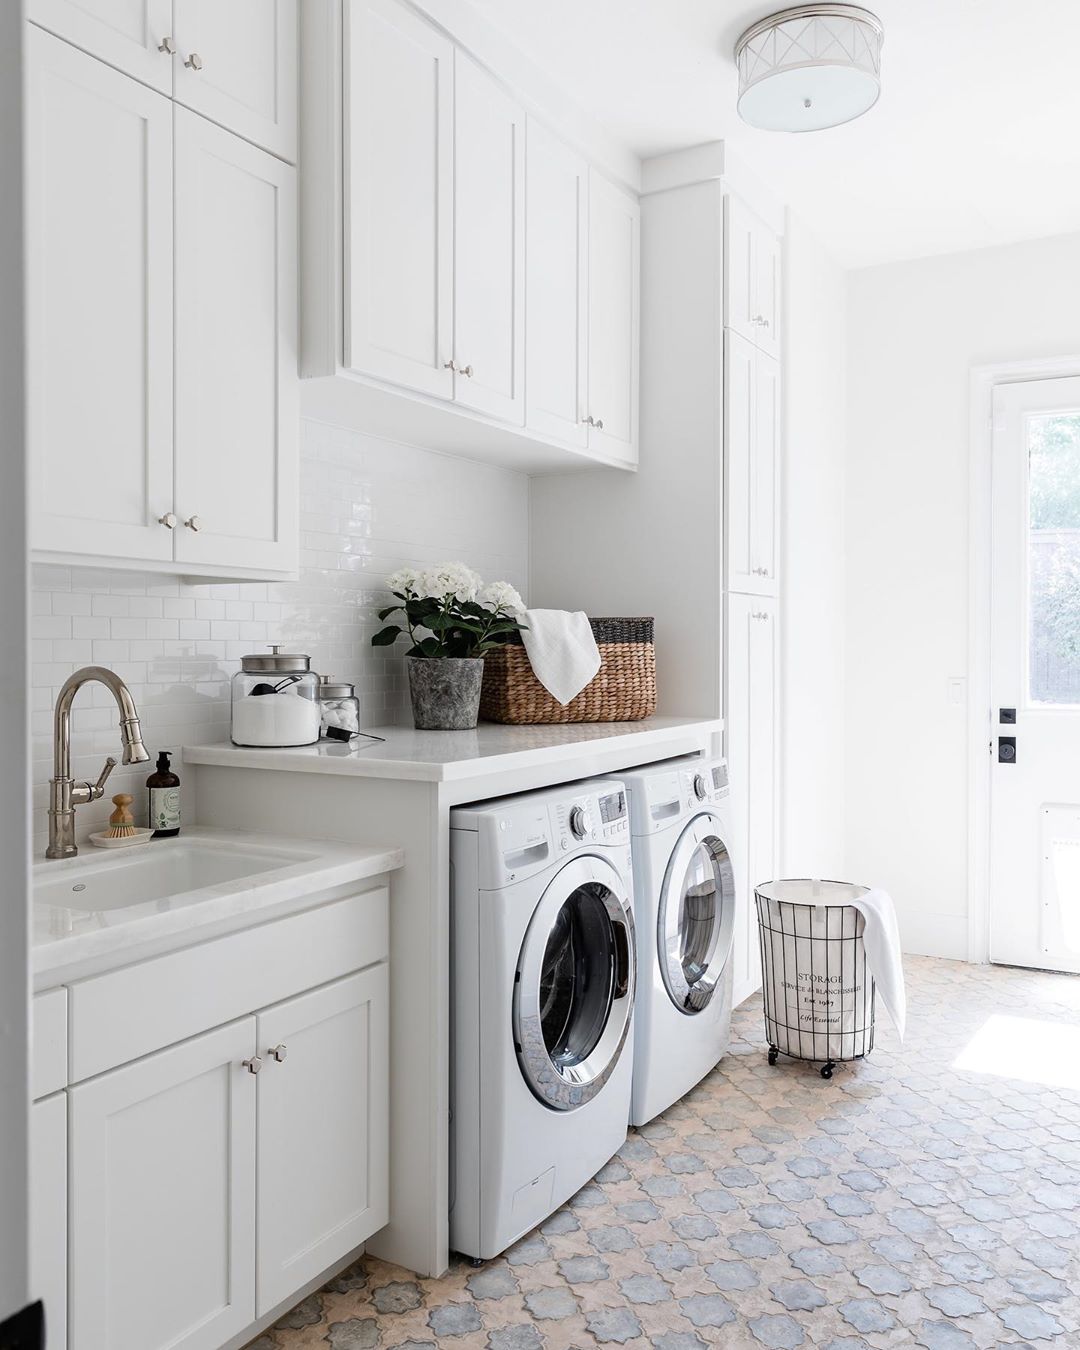 White laundry room with natural light. Photo by Instagram user @katrina_stumbos